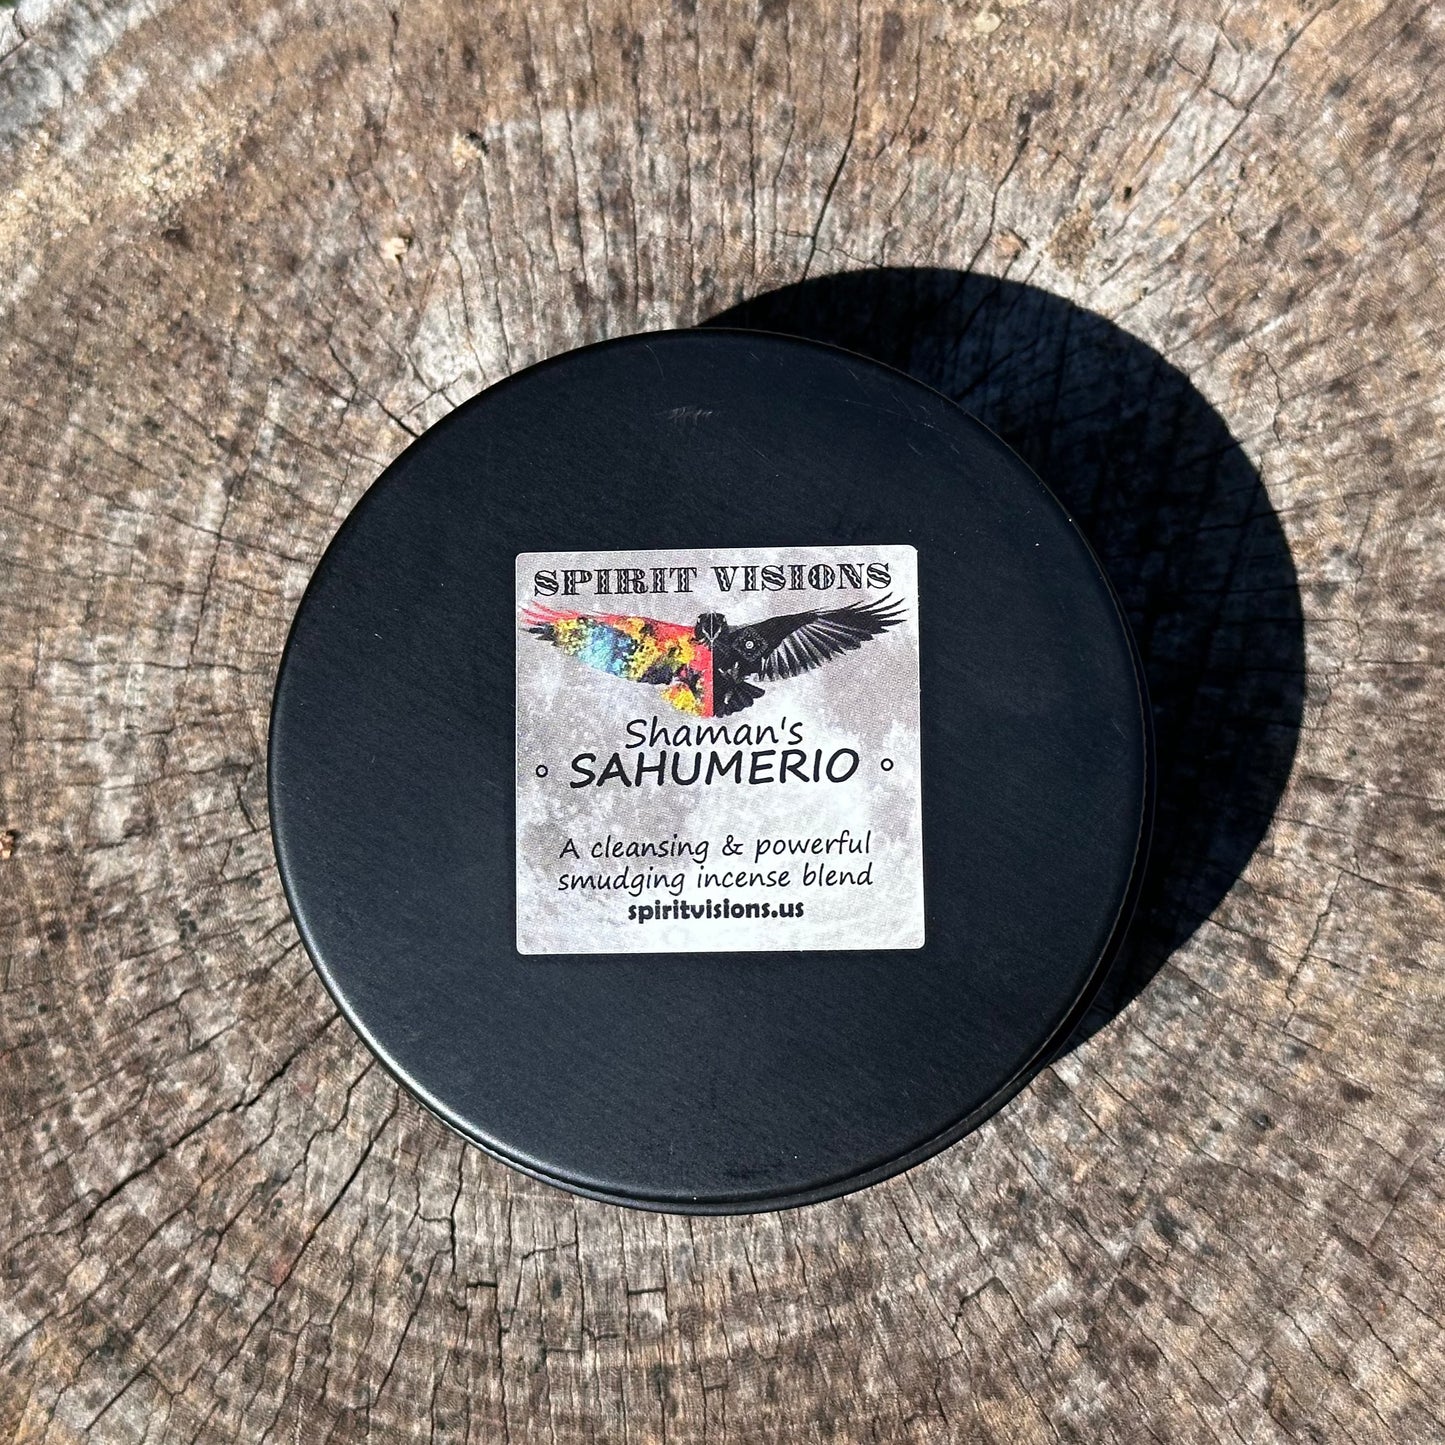 Shamans Shaumerio - Colombian Ceremonial incense blend